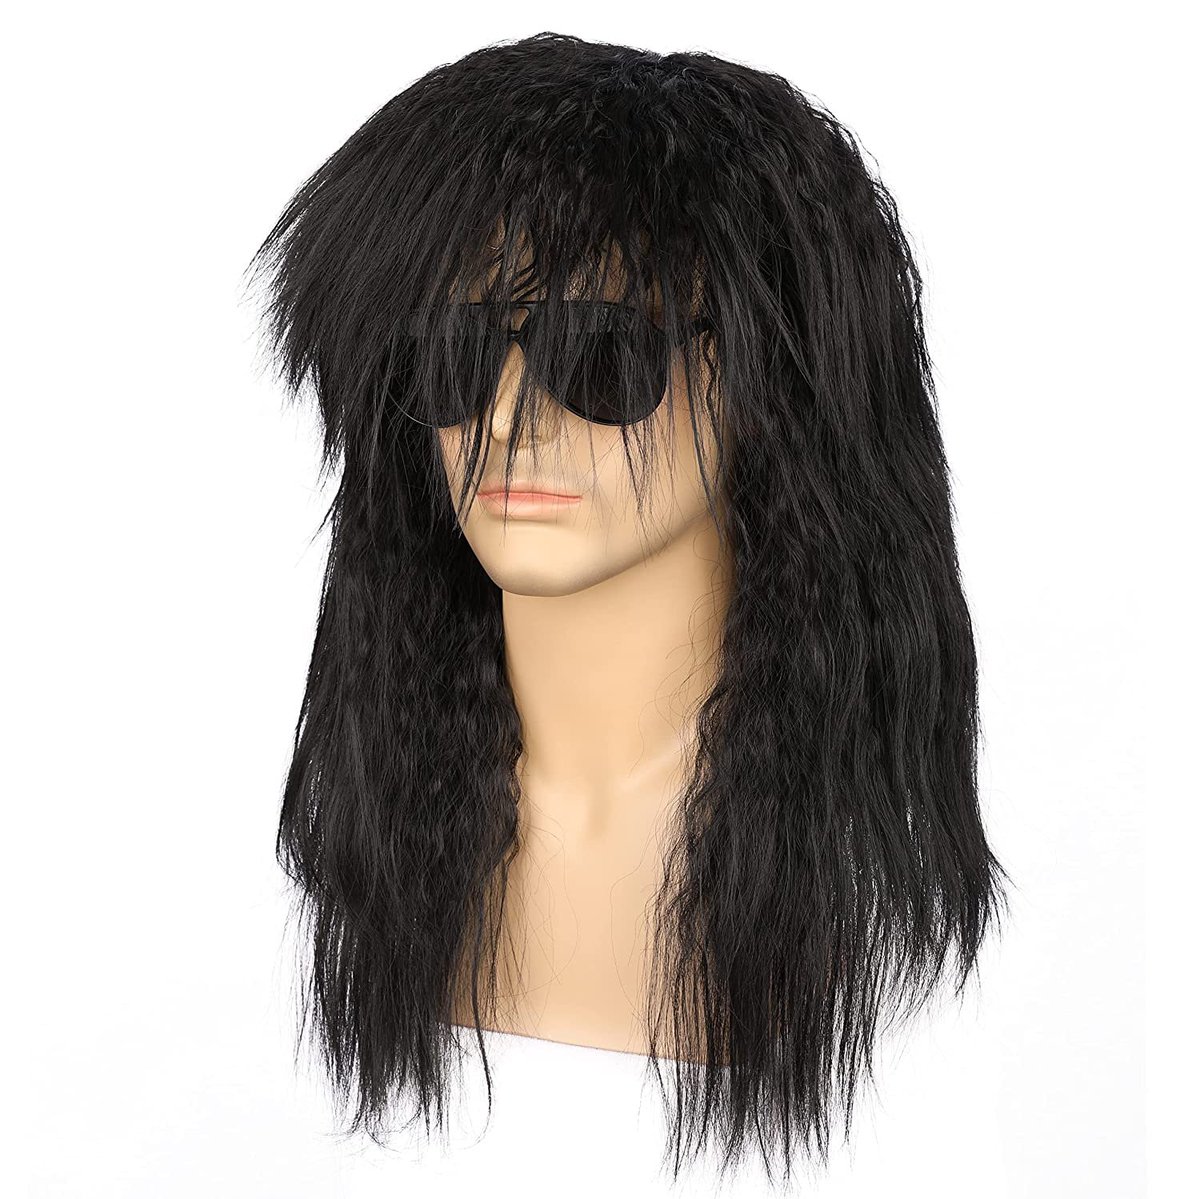 Excited to share the latest addition to my #etsy shop: Men's Long Curly Synthetic Wavy Hair 80s Punk Rock Wig Cosplay Wigs (Black) etsy.me/3N7QTLt #black #wigs #synthetichair #curly #adultsize #cosplaywigs #shortcurlywig #judgewig #colonialjudgewig